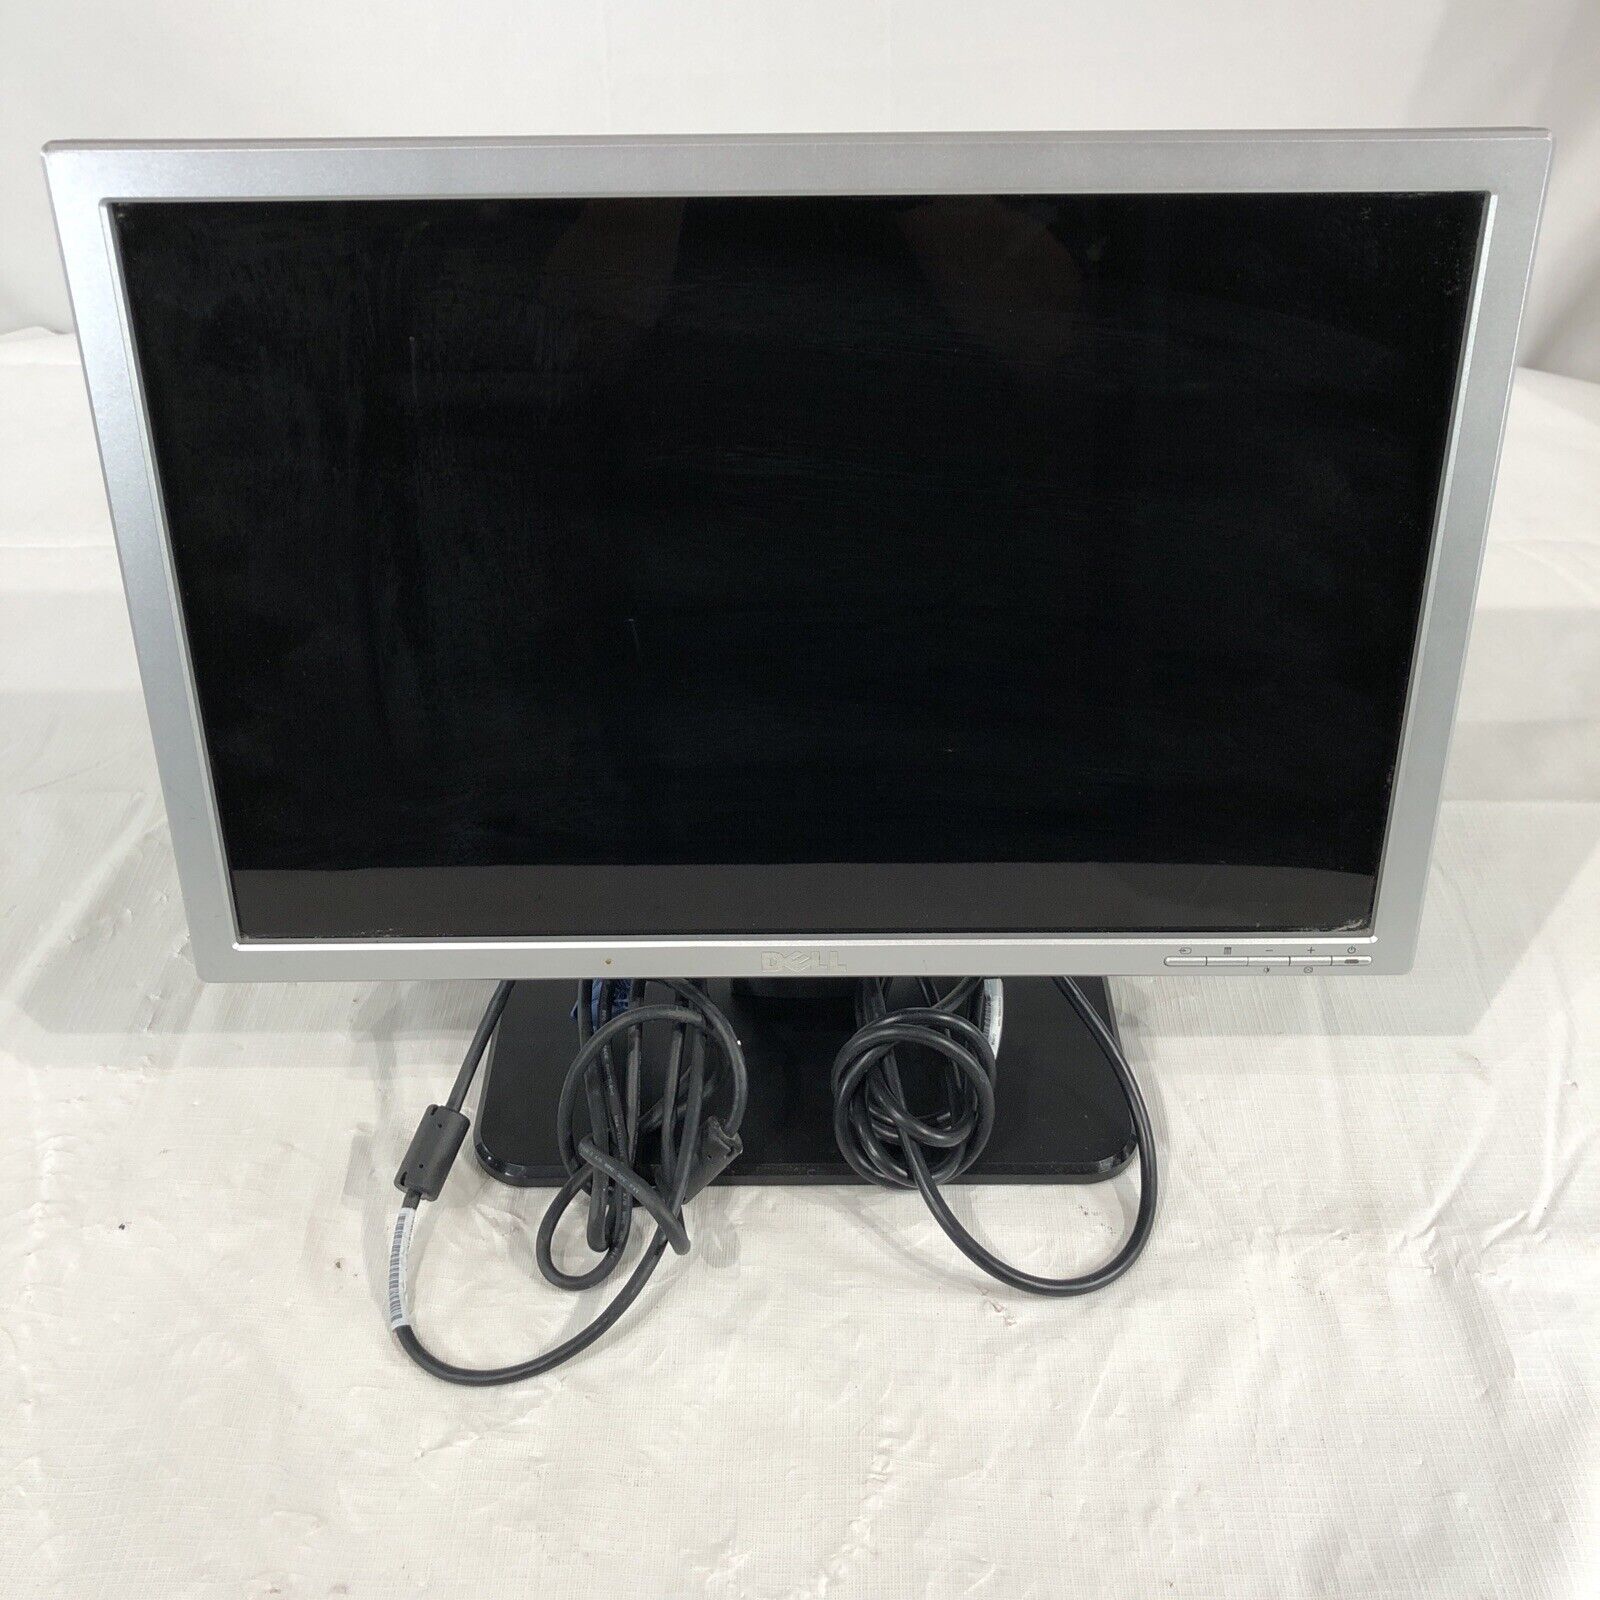 Used Dell SE199WFPF LCD Monitor With Cable And Power Cord